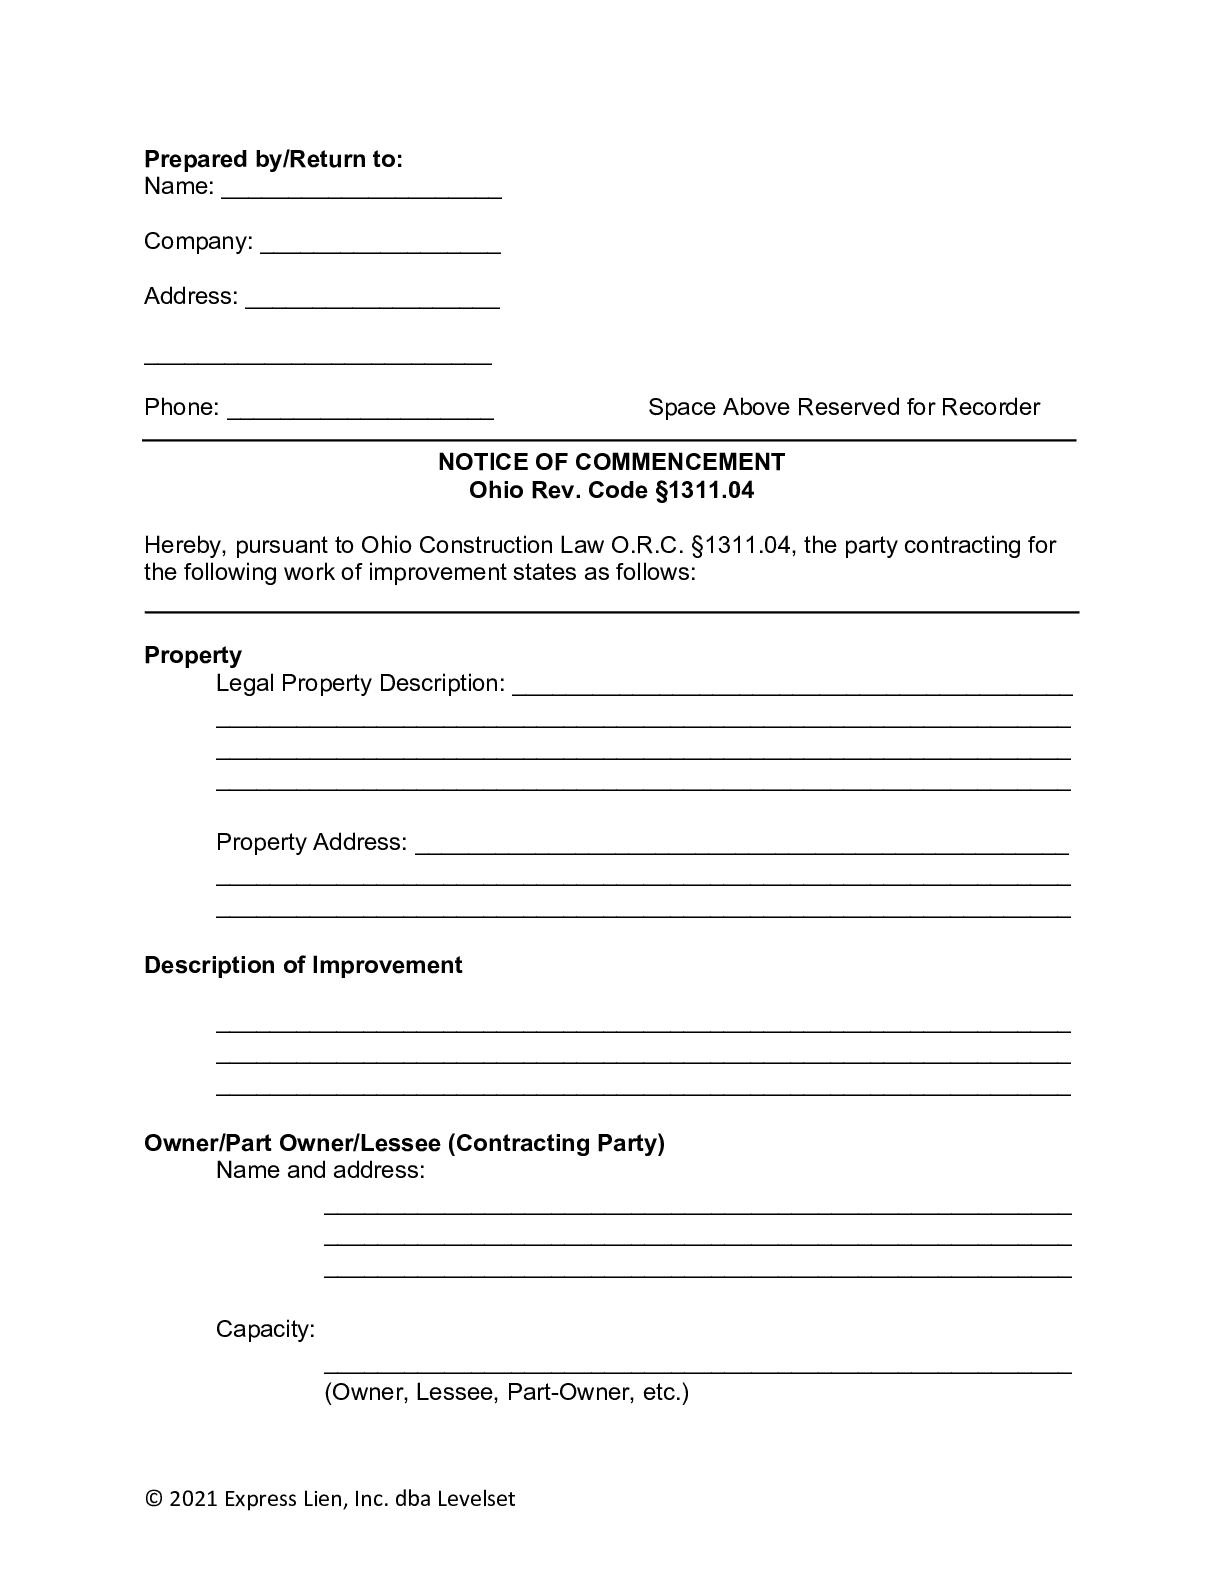 Ohio Notice of Commencement Form - free from